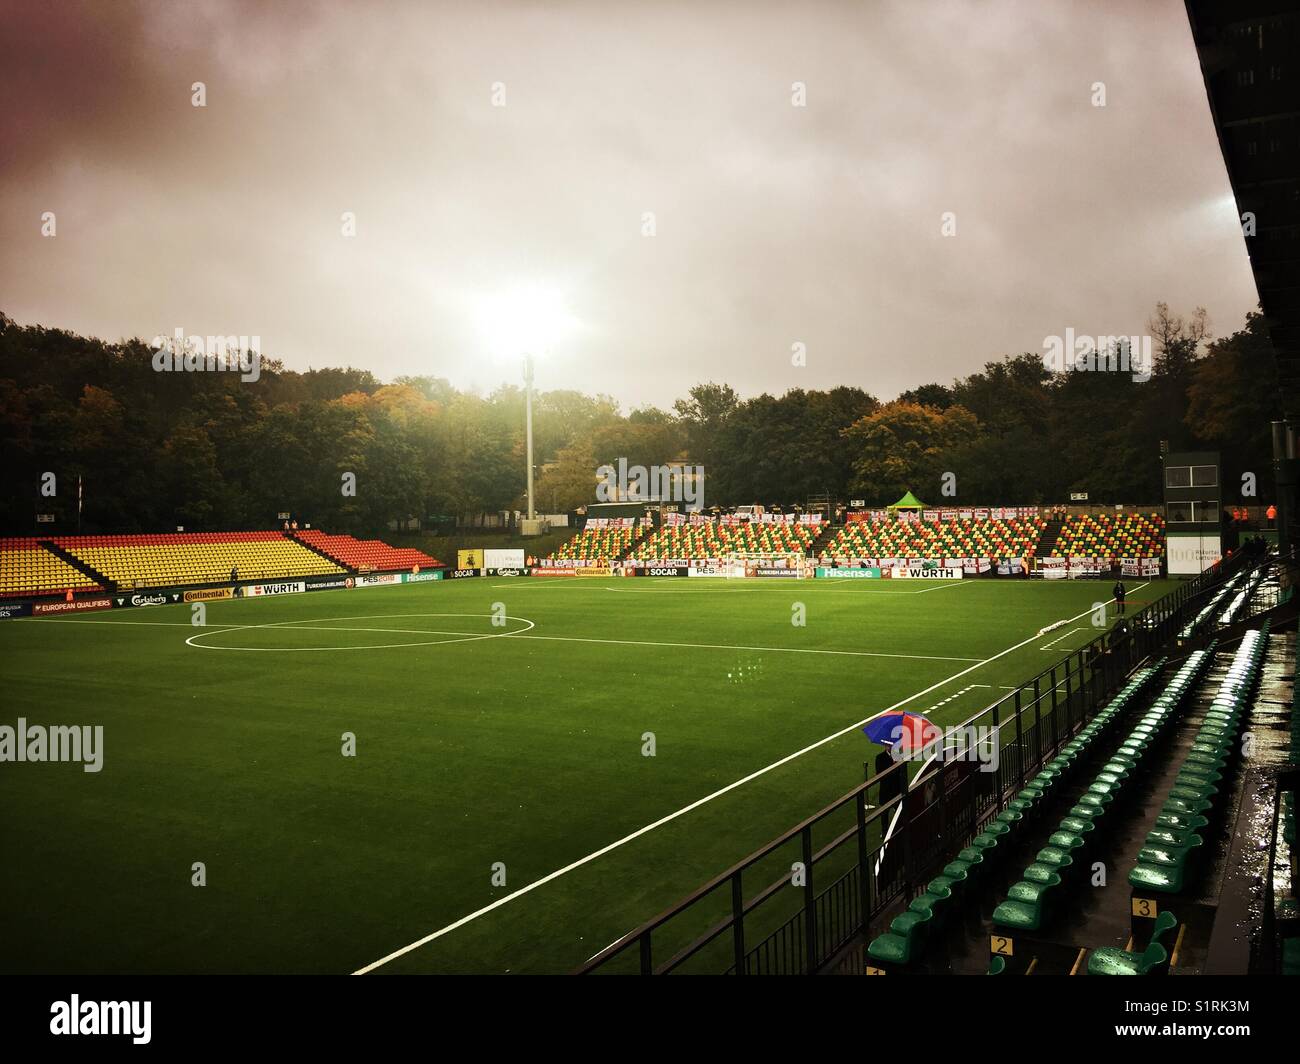 A football pitch is seen at a stadium in Vilnius, Lithuania. Stock Photo